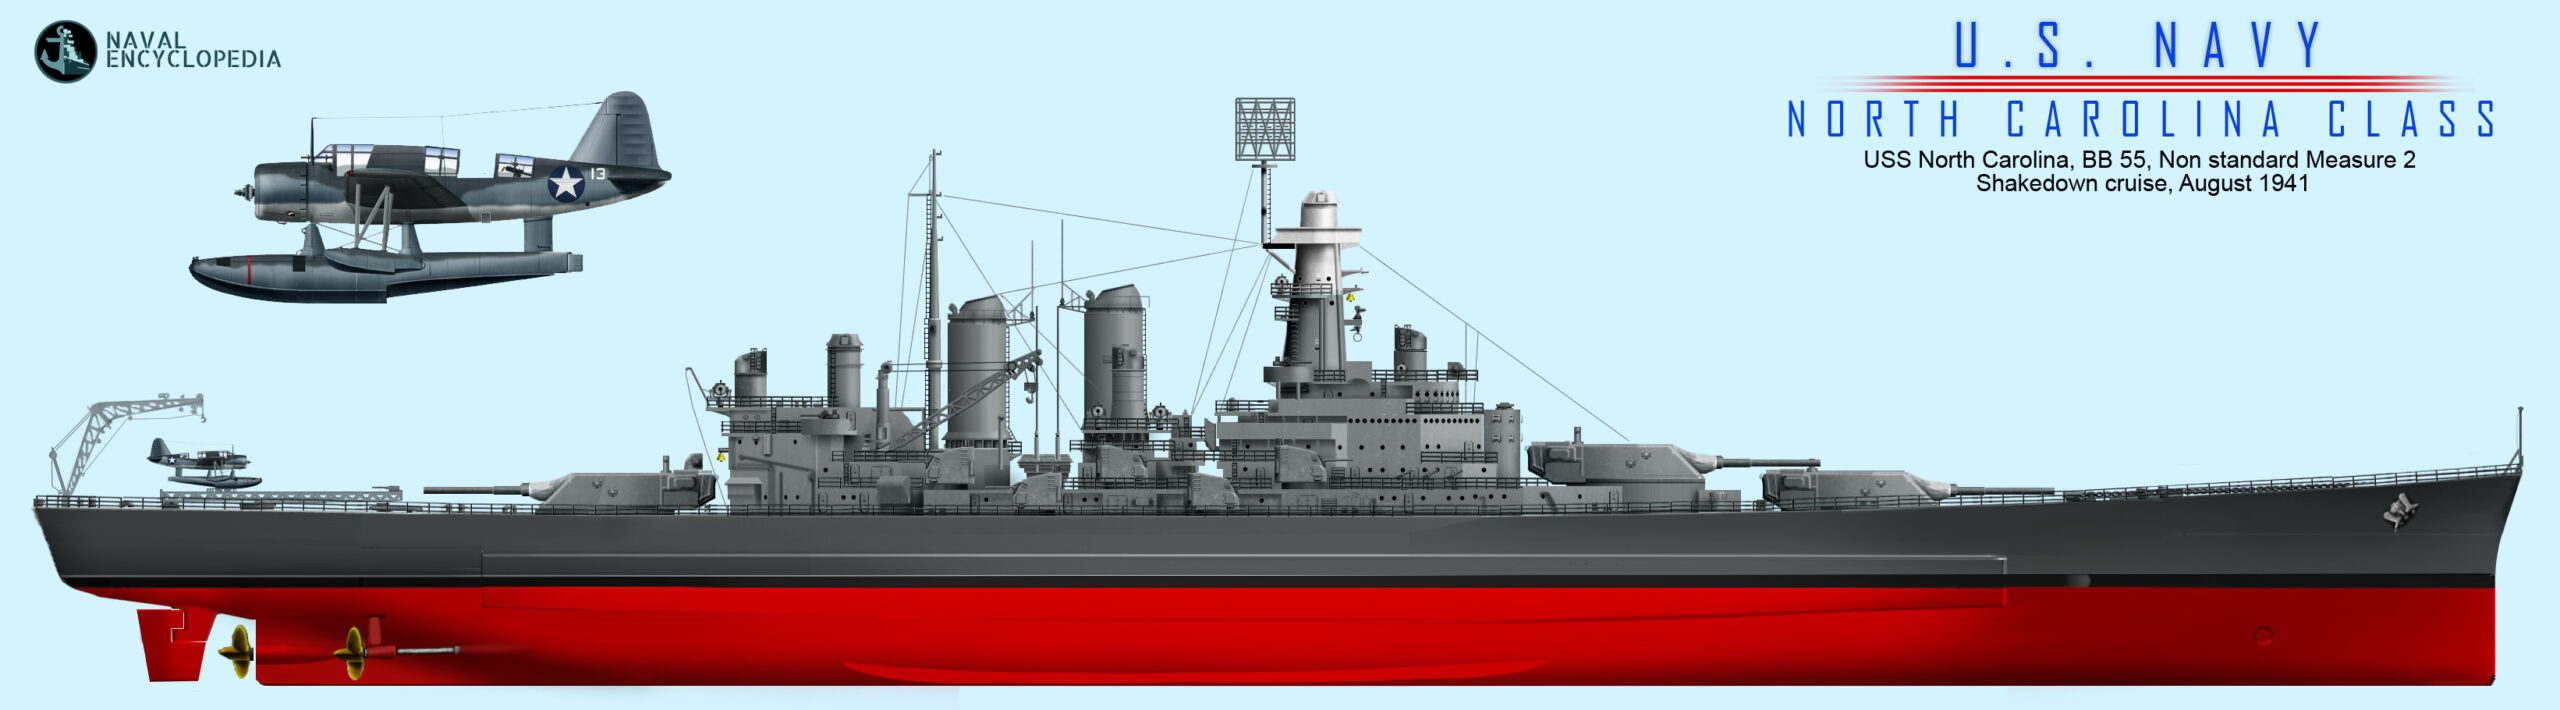 USS North Carolina as comissioned, non standard Measure 2, August 1941